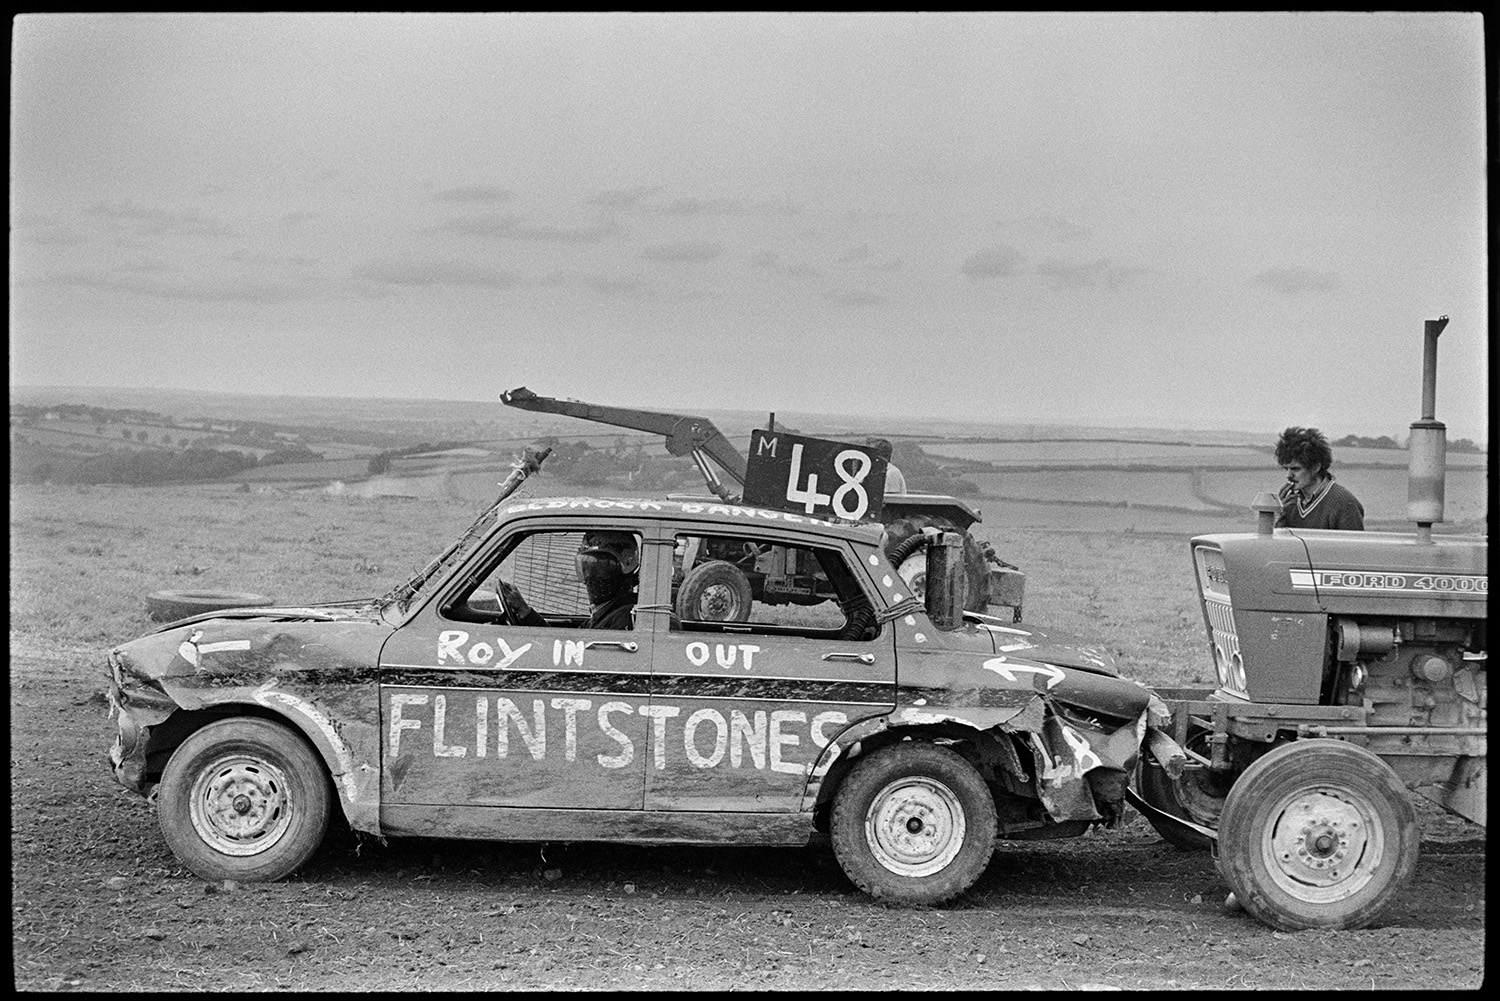 Stock cars at banger races. 
[A driver in a stock car parked in front of a tractor at a banger race at Okehampton. The car has 'Roy In Out Flintstones' written on the side.]